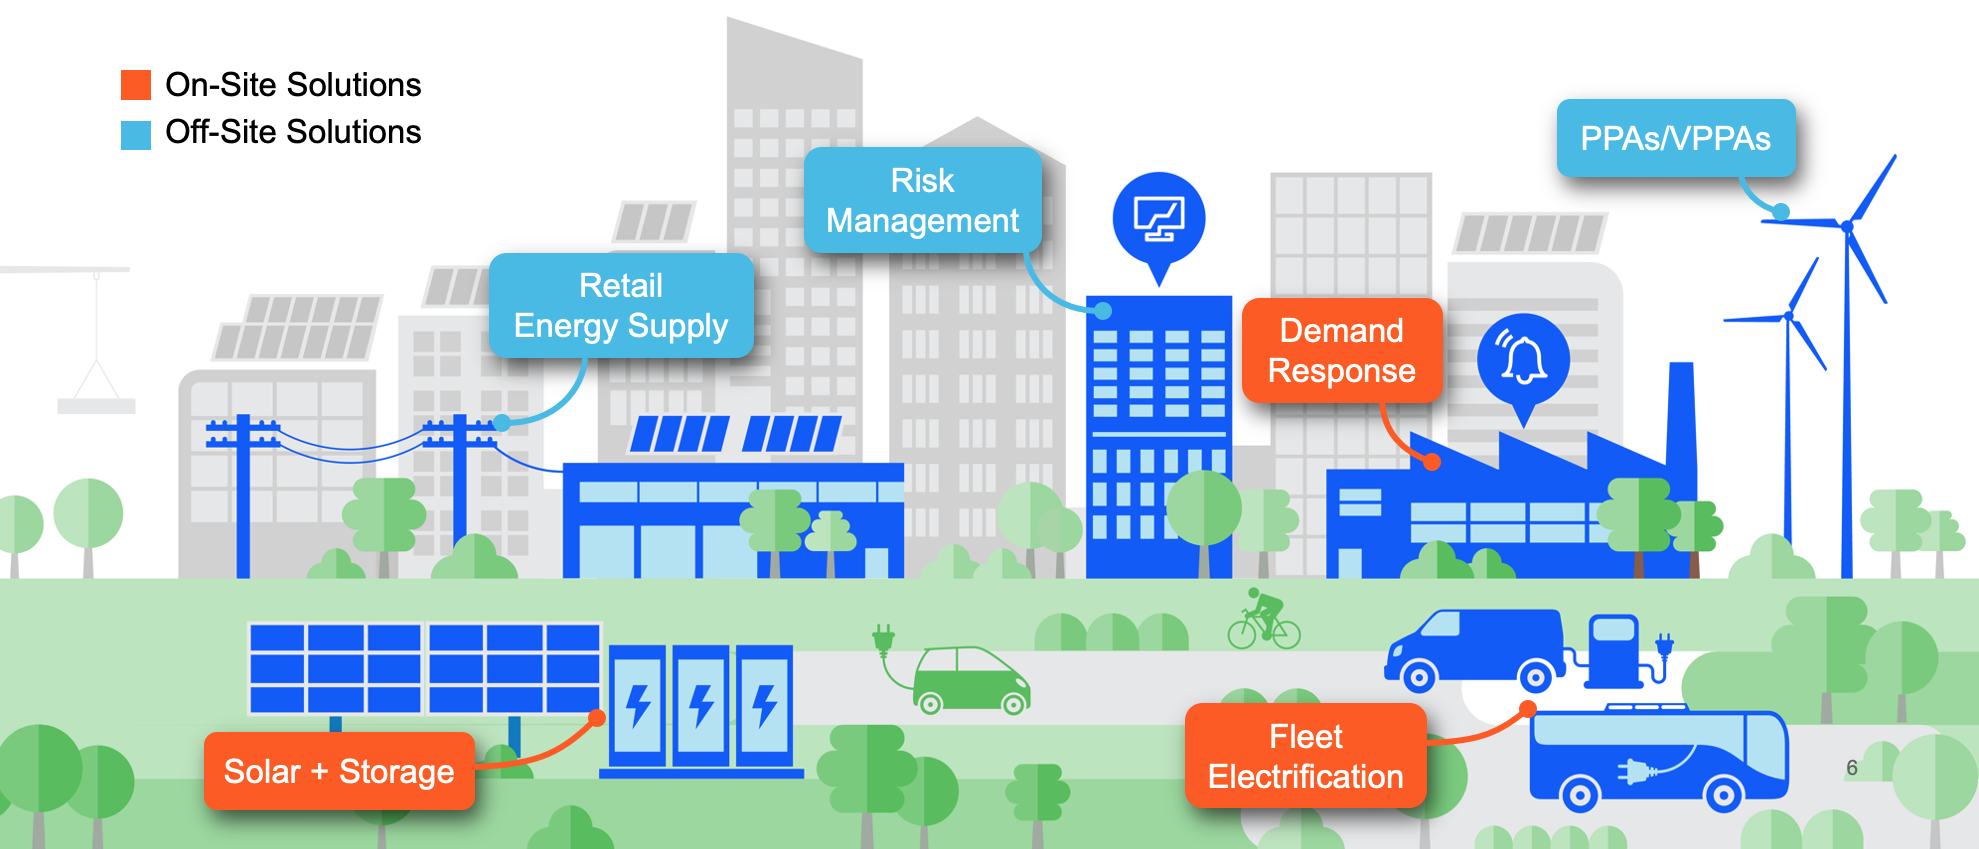 Illustration of a city showing various on-site and off-site electrification solutions from Enel